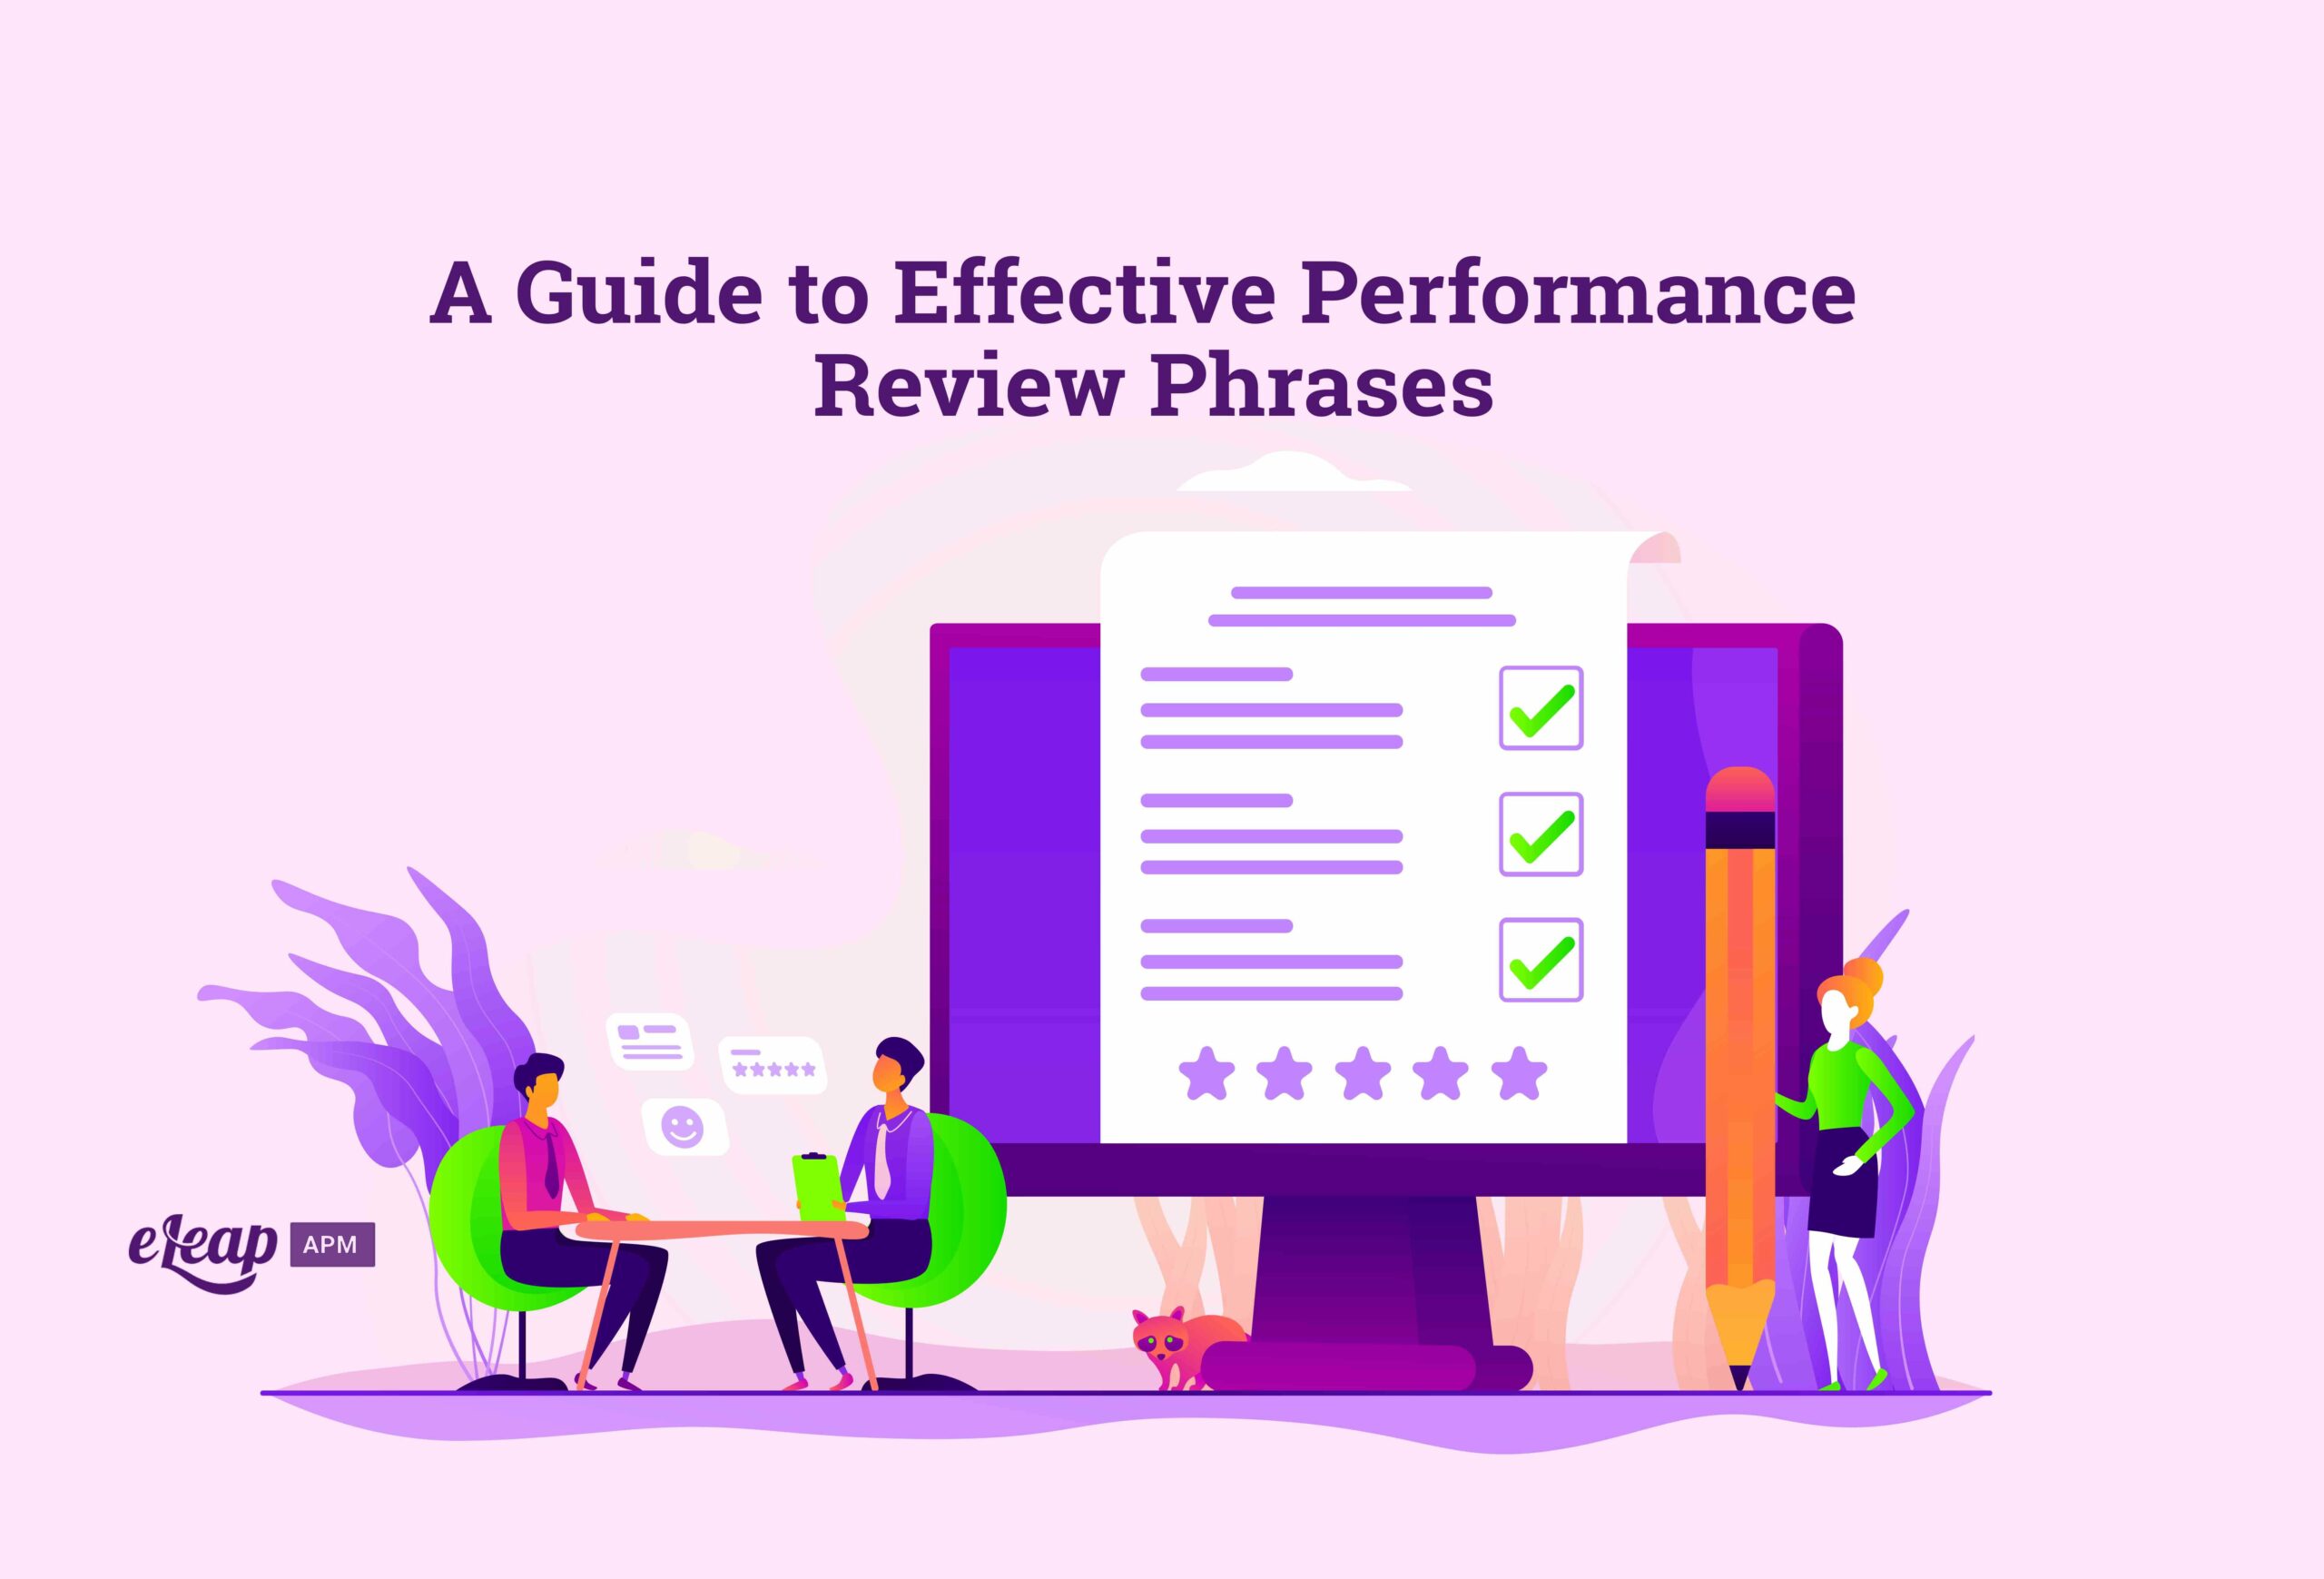 A Guide to Effective Performance Review Phrases